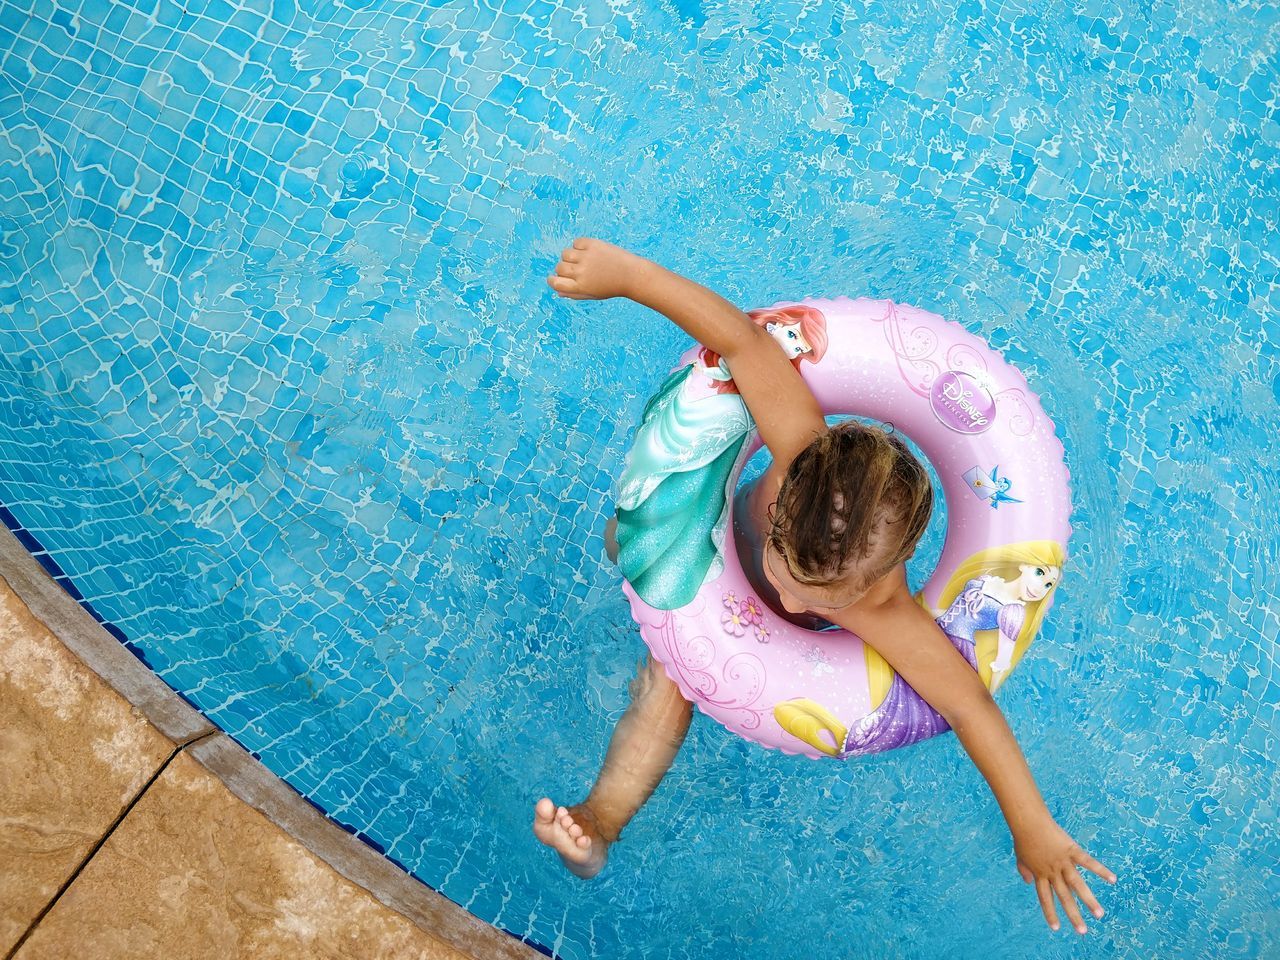 swimming pool, child, childhood, water, high angle view, children only, summer, full length, smiling, girls, inflatable ring, one person, one girl only, playing, cheerful, directly above, happiness, fun, enjoyment, people, day, vacations, swimming, floating on water, lying down, outdoors, portrait, adult